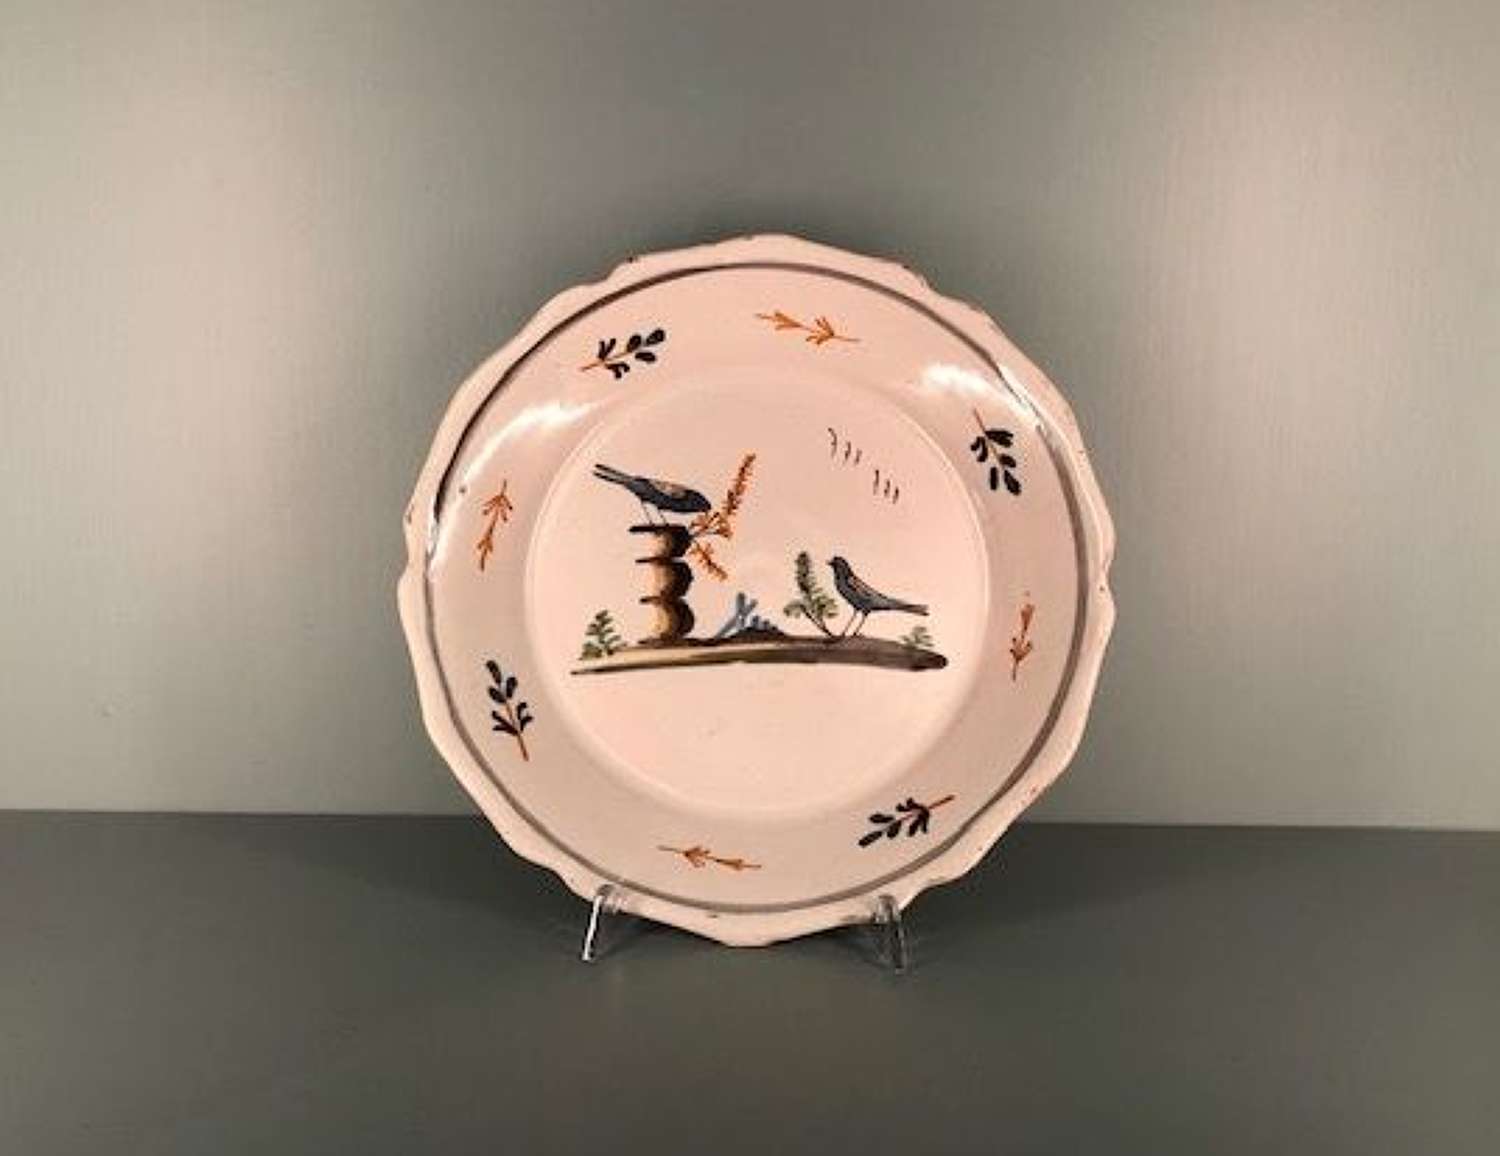 18th century N. French faience plate depicting two birds